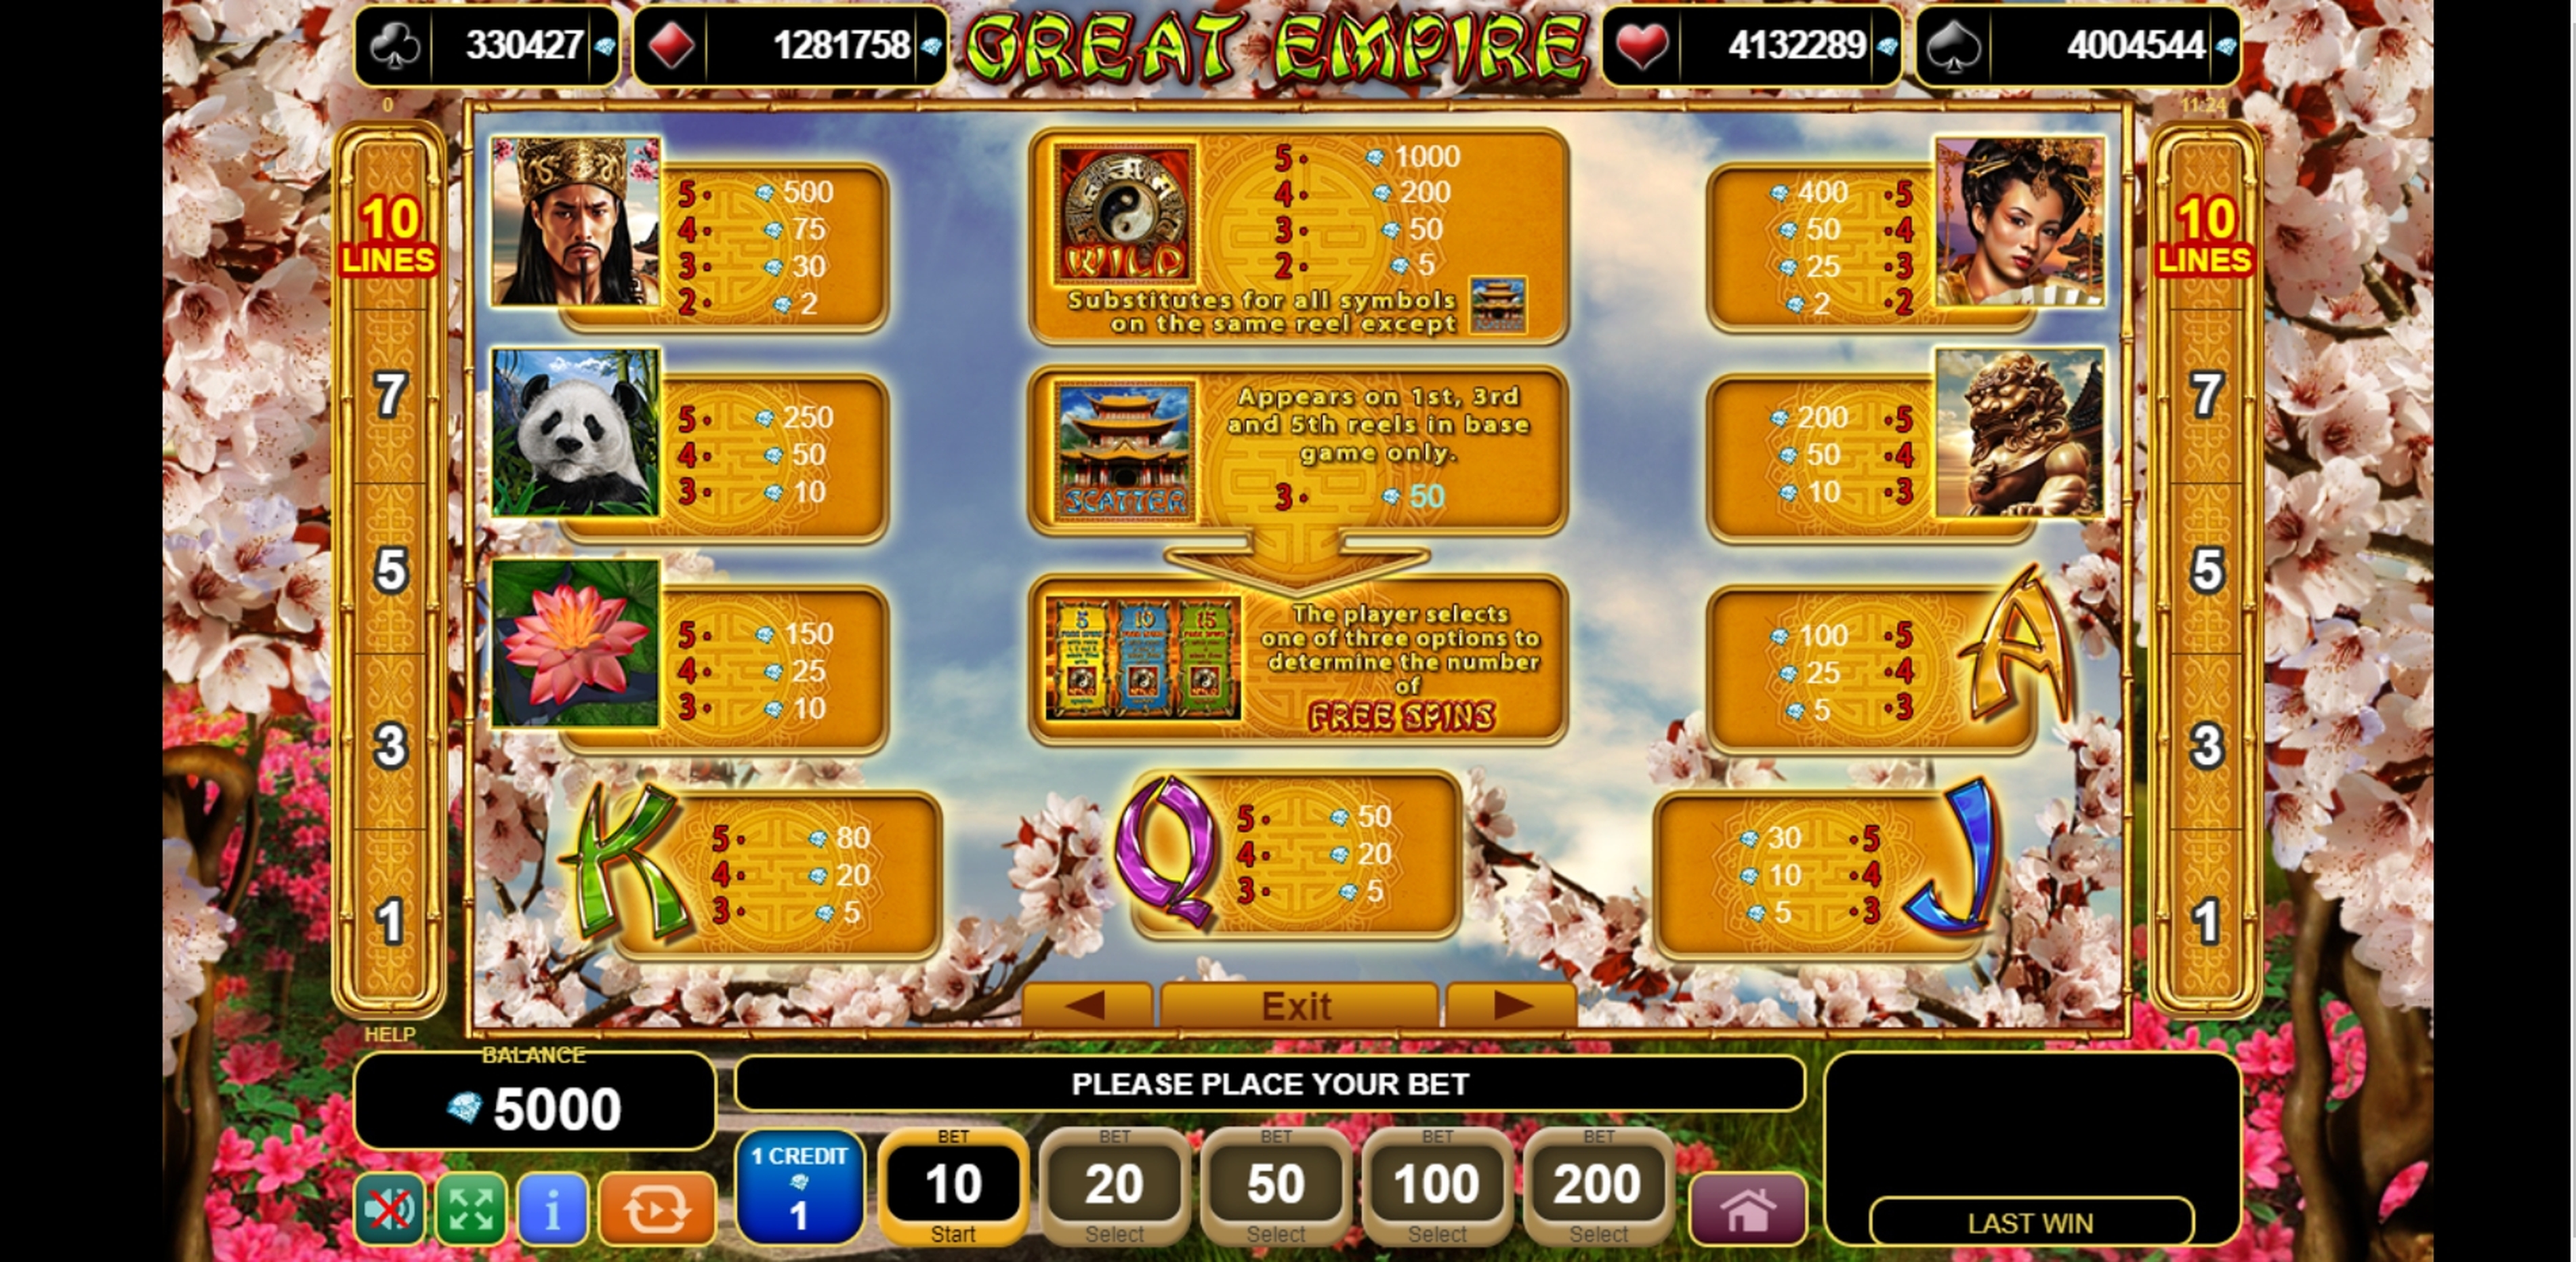 Info of Great Empire Slot Game by EGT